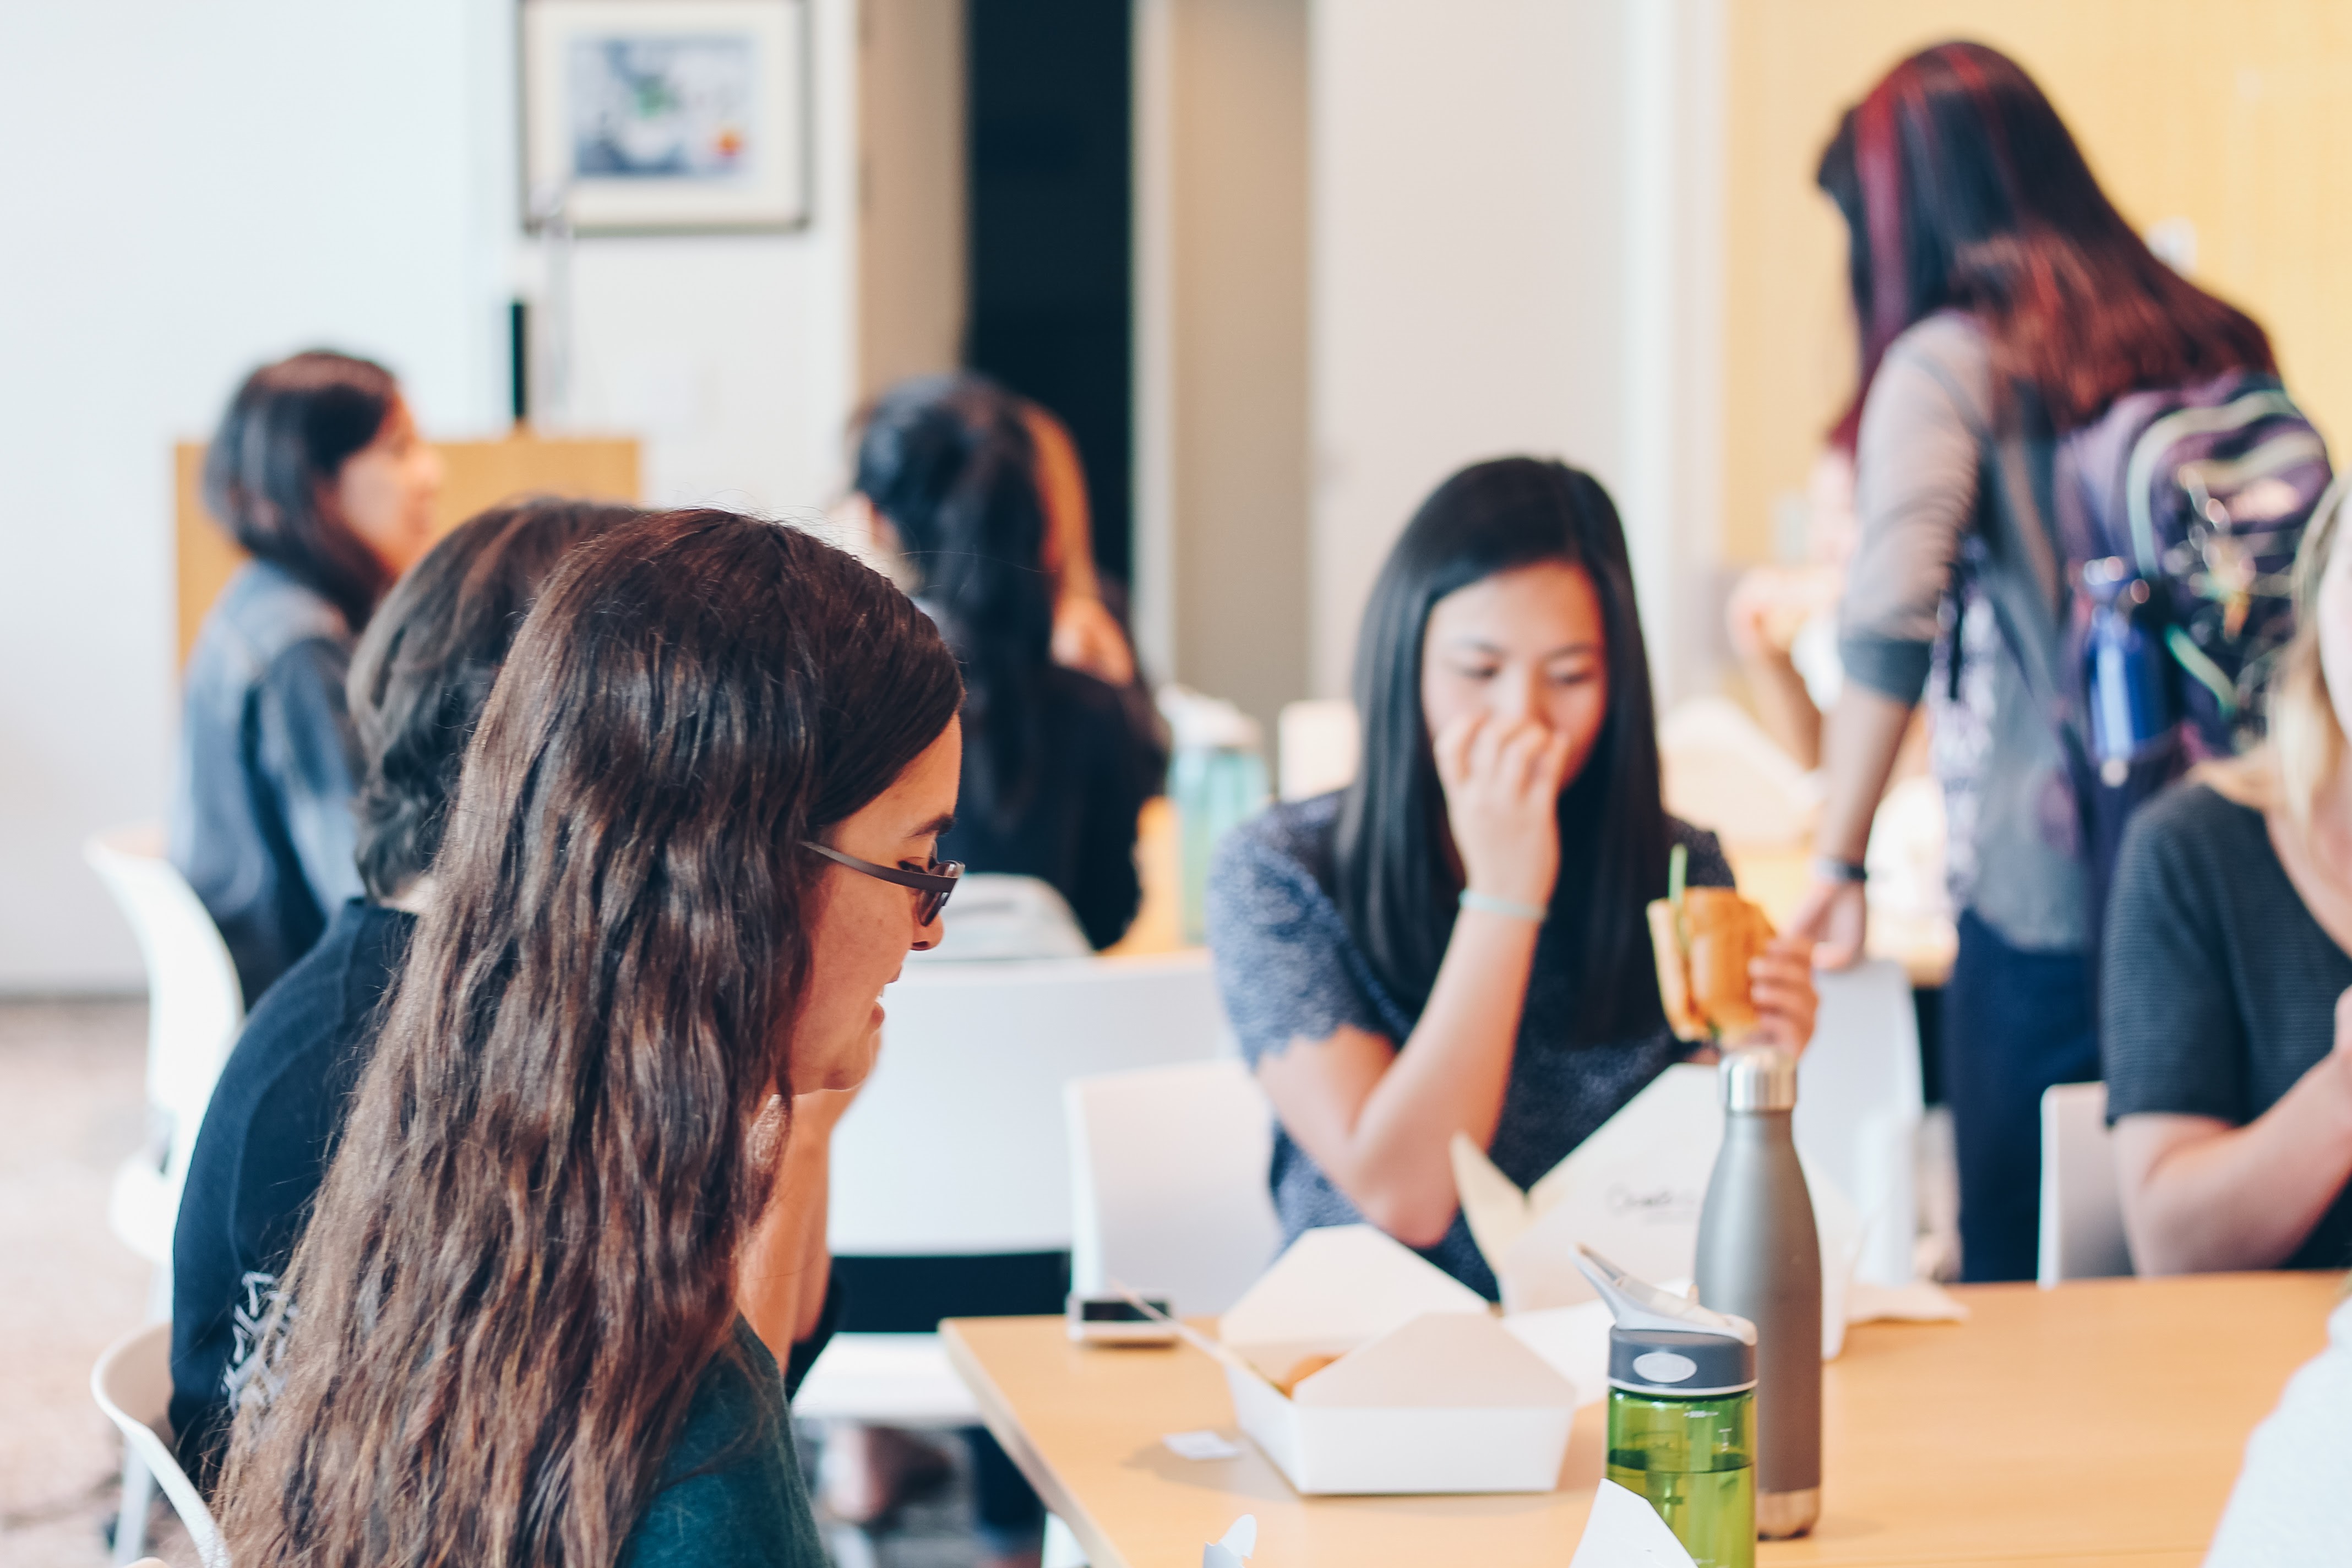 WICSE has frequent mentoring lunches with female EECS undergraduate students.